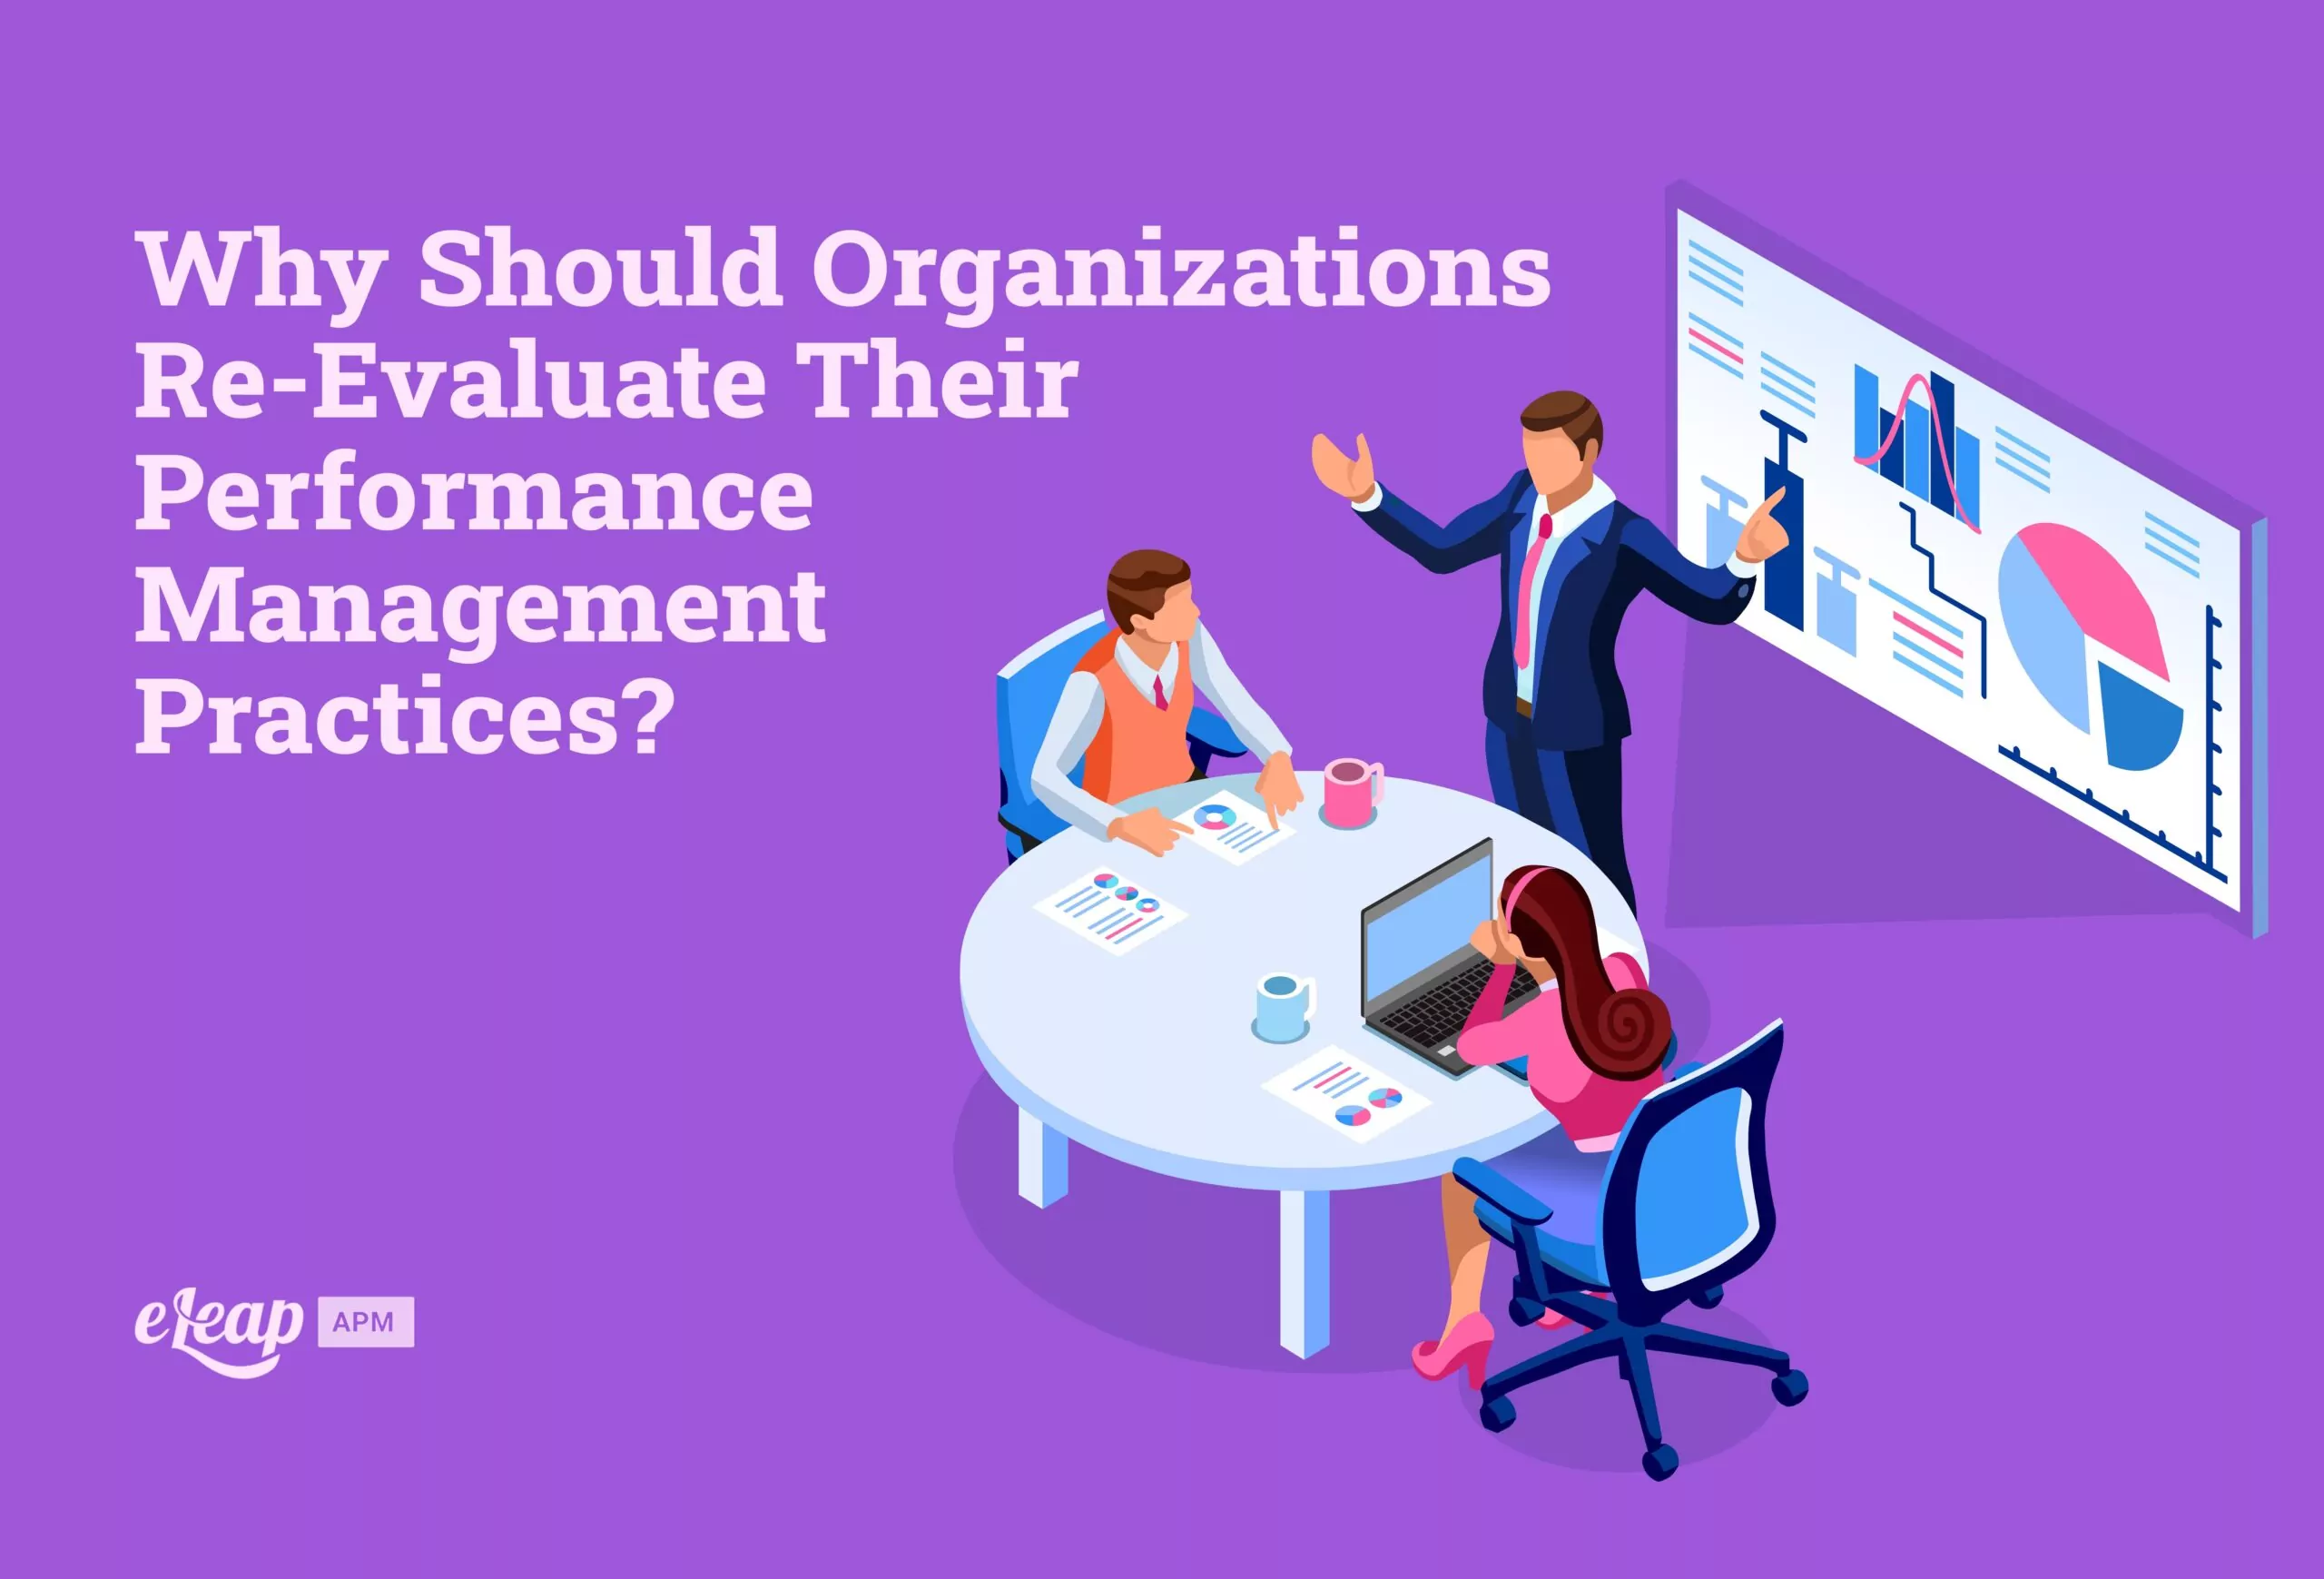 Why Should Organizations Re-Evaluate Their Performance Management Practices?